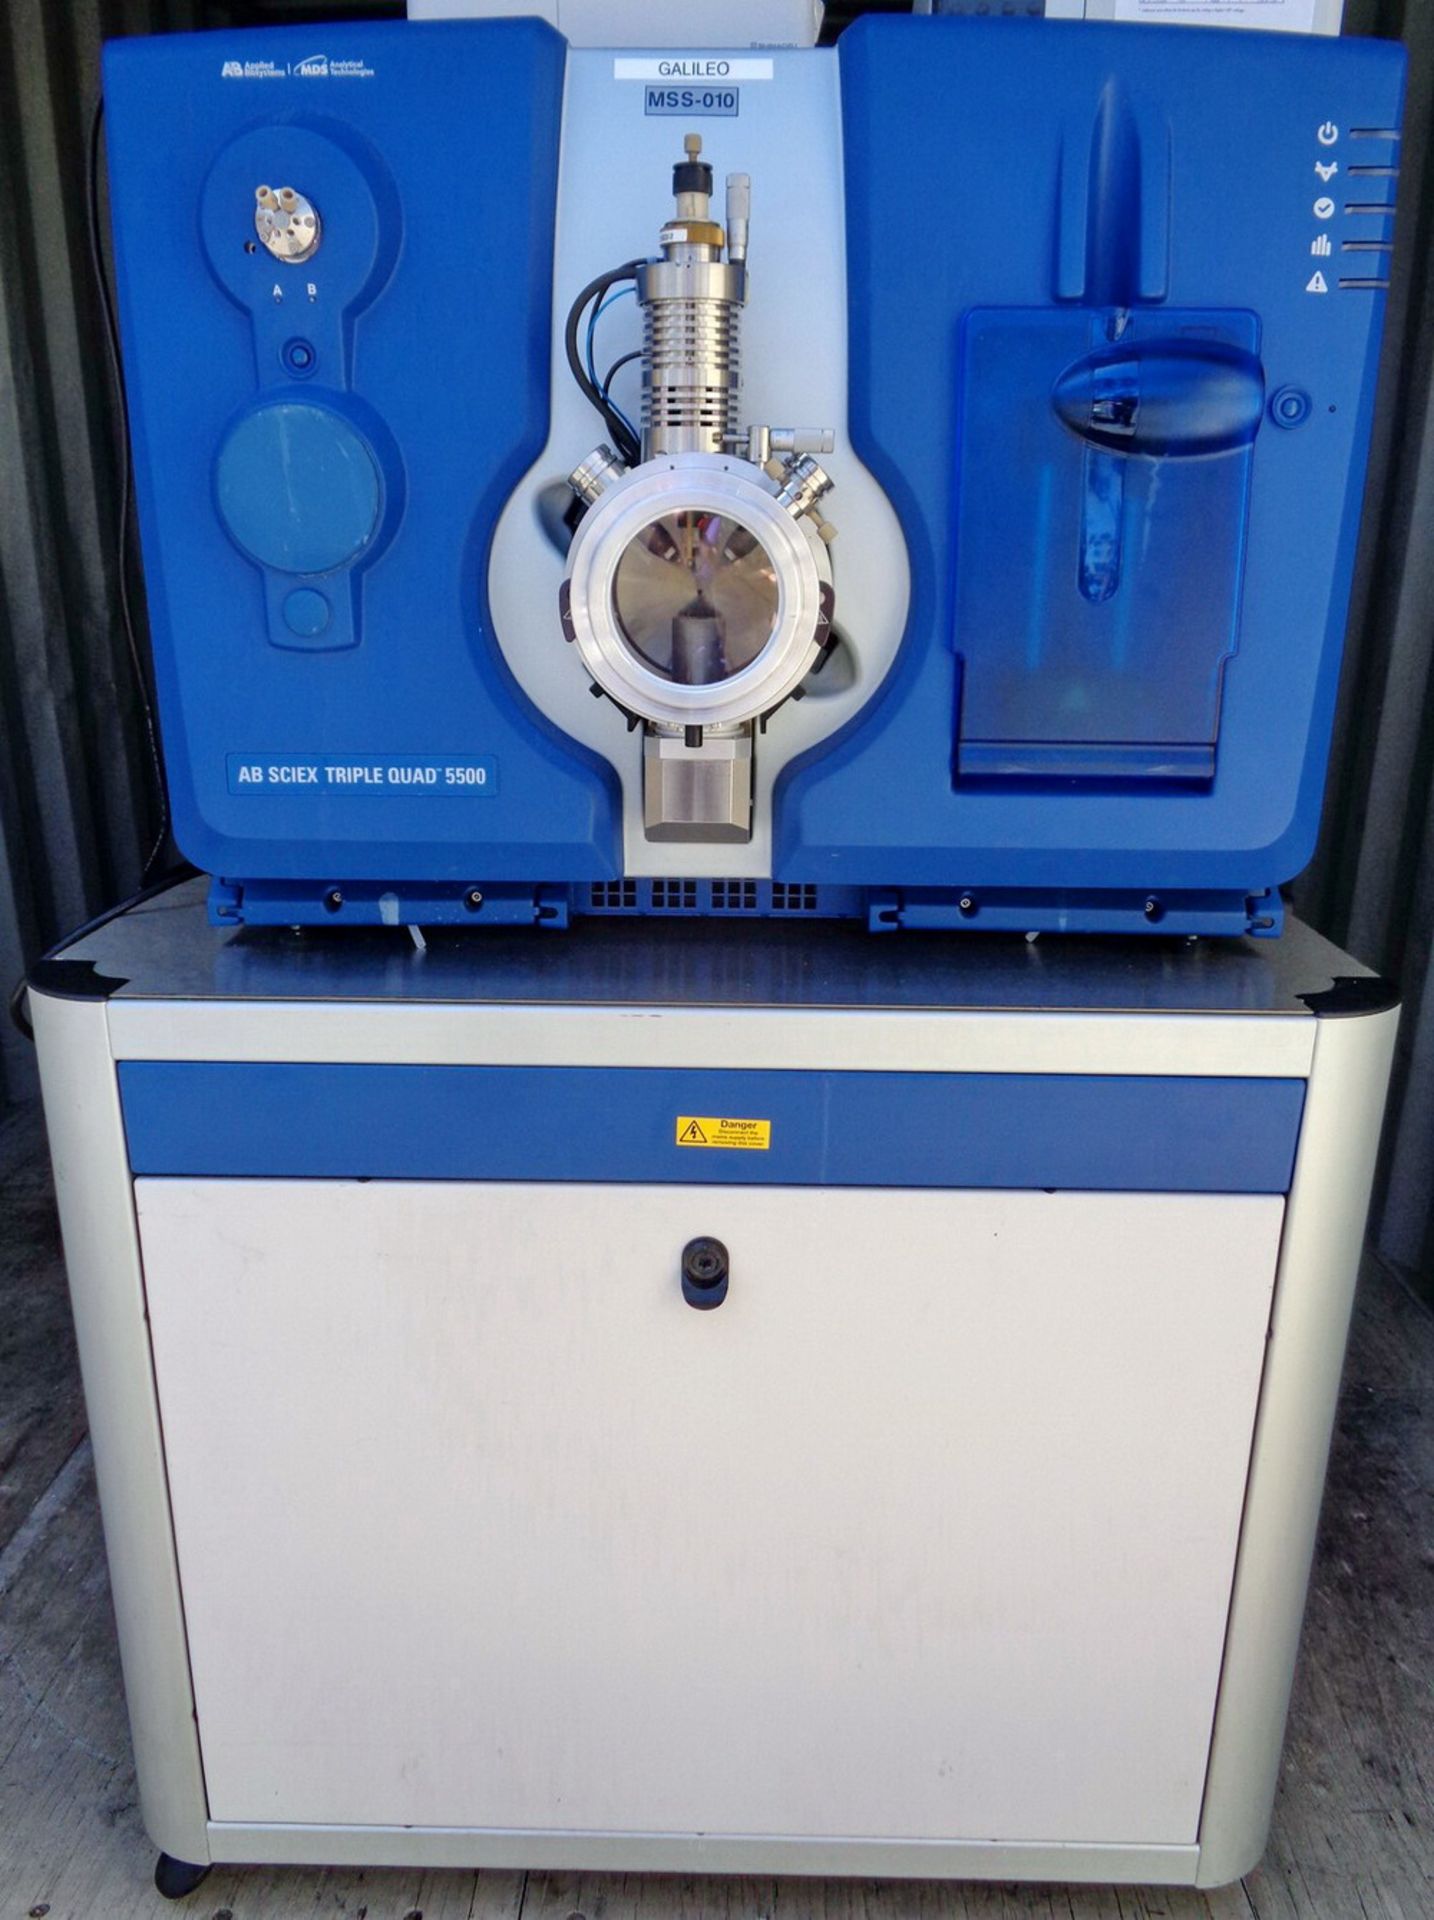 AB Applied Biosystems / MDS Sciex Triple Quad 5500 Trap LC/MS/MS System, S/N BB10230812 - Image 2 of 9